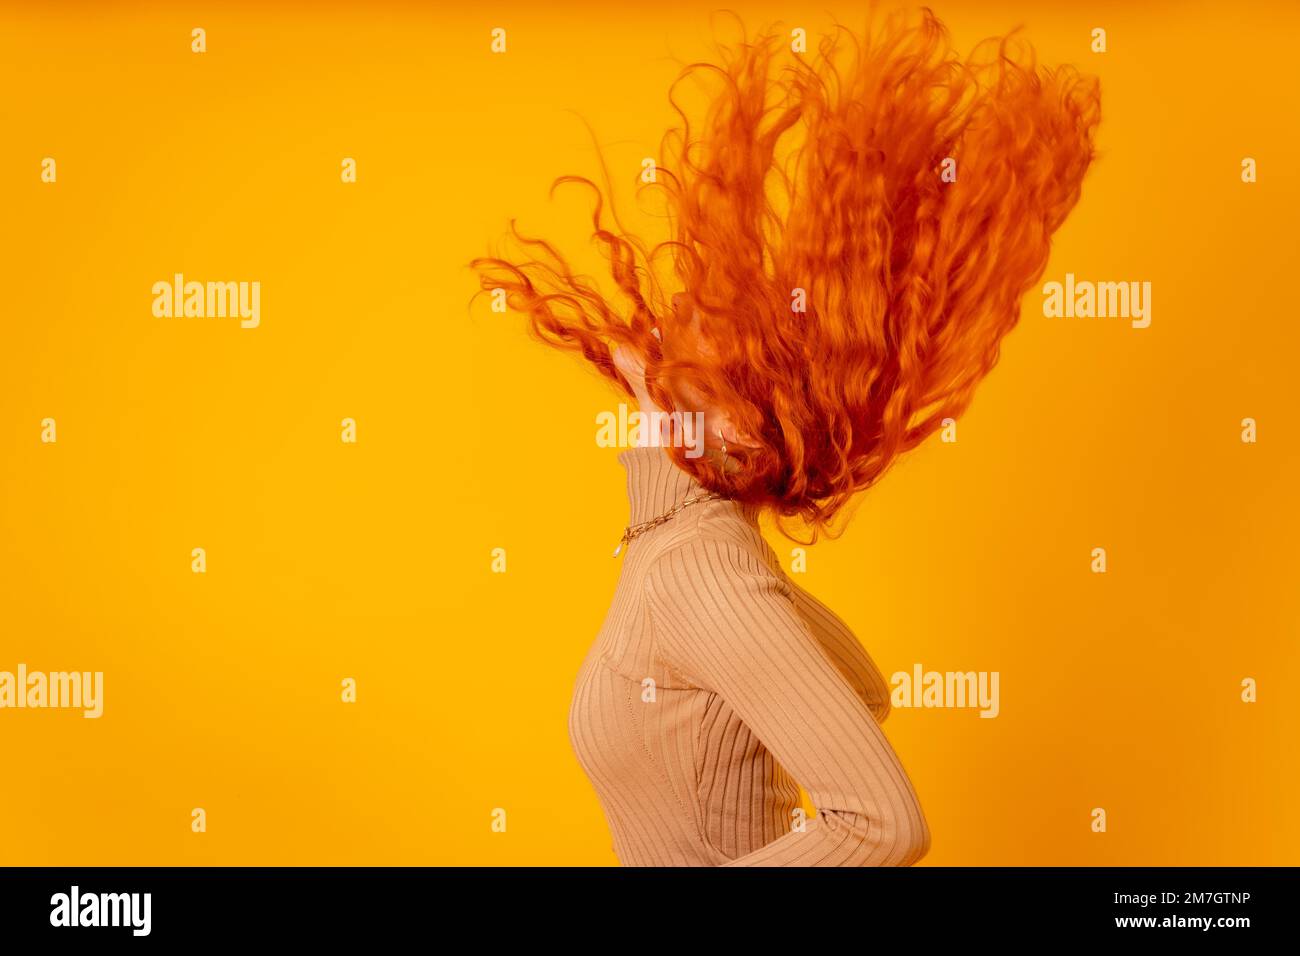 Red-haired woman on a yellow background, studio shot, moving her hair, tousled hair Stock Photo